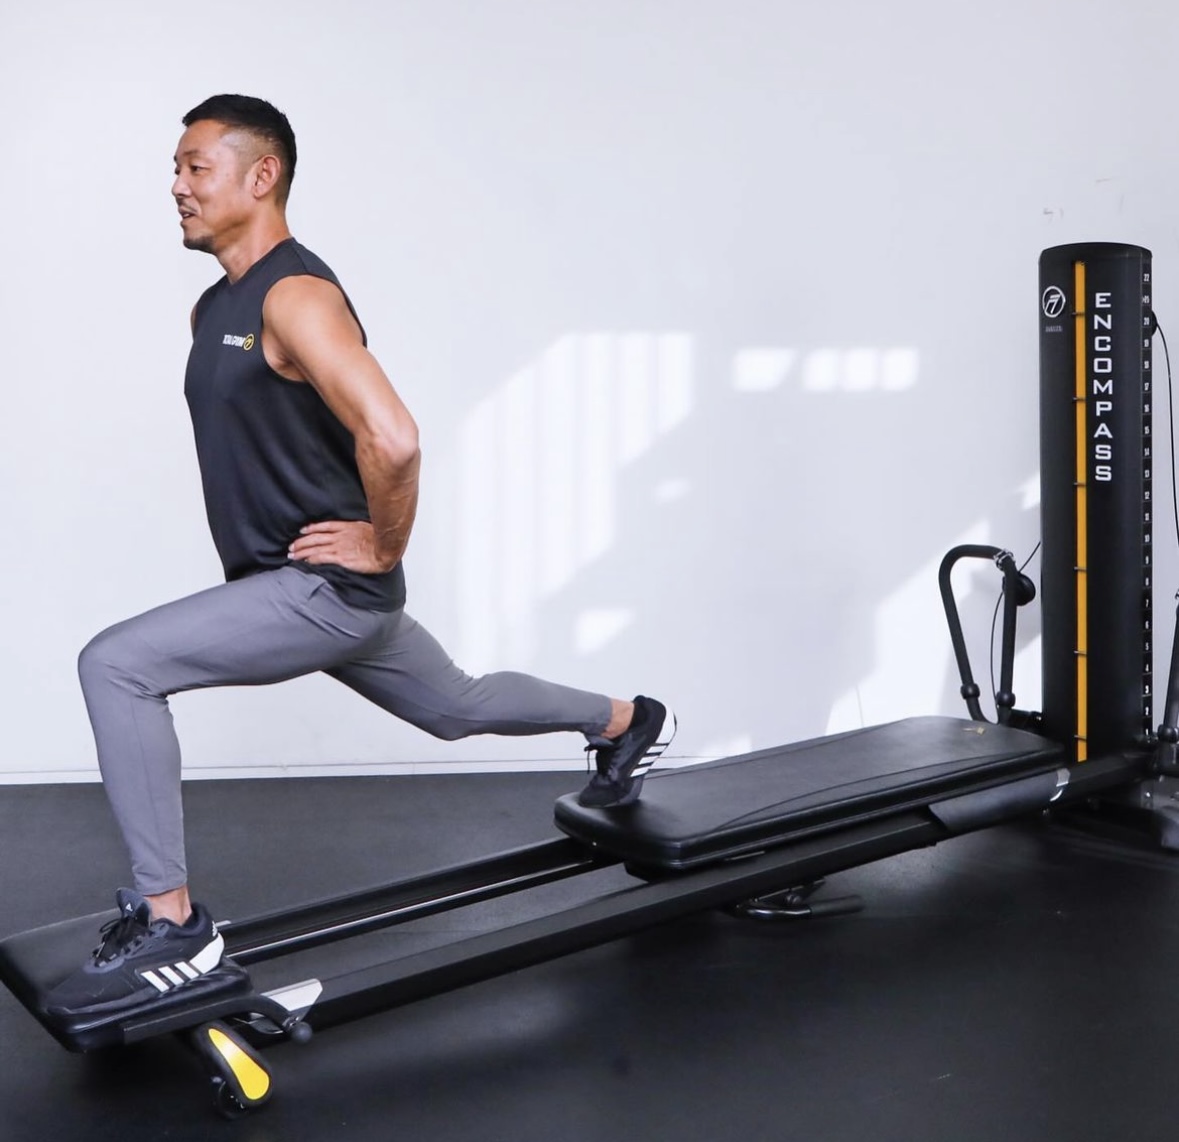 The Standing Platform facilitates proper body alignment during Pilates and other exercises while it provides dynamic instability toward improving balance, flexibility and coordination! Click here to find out more: zurl.co/1C33 #functionaltraining #pilates